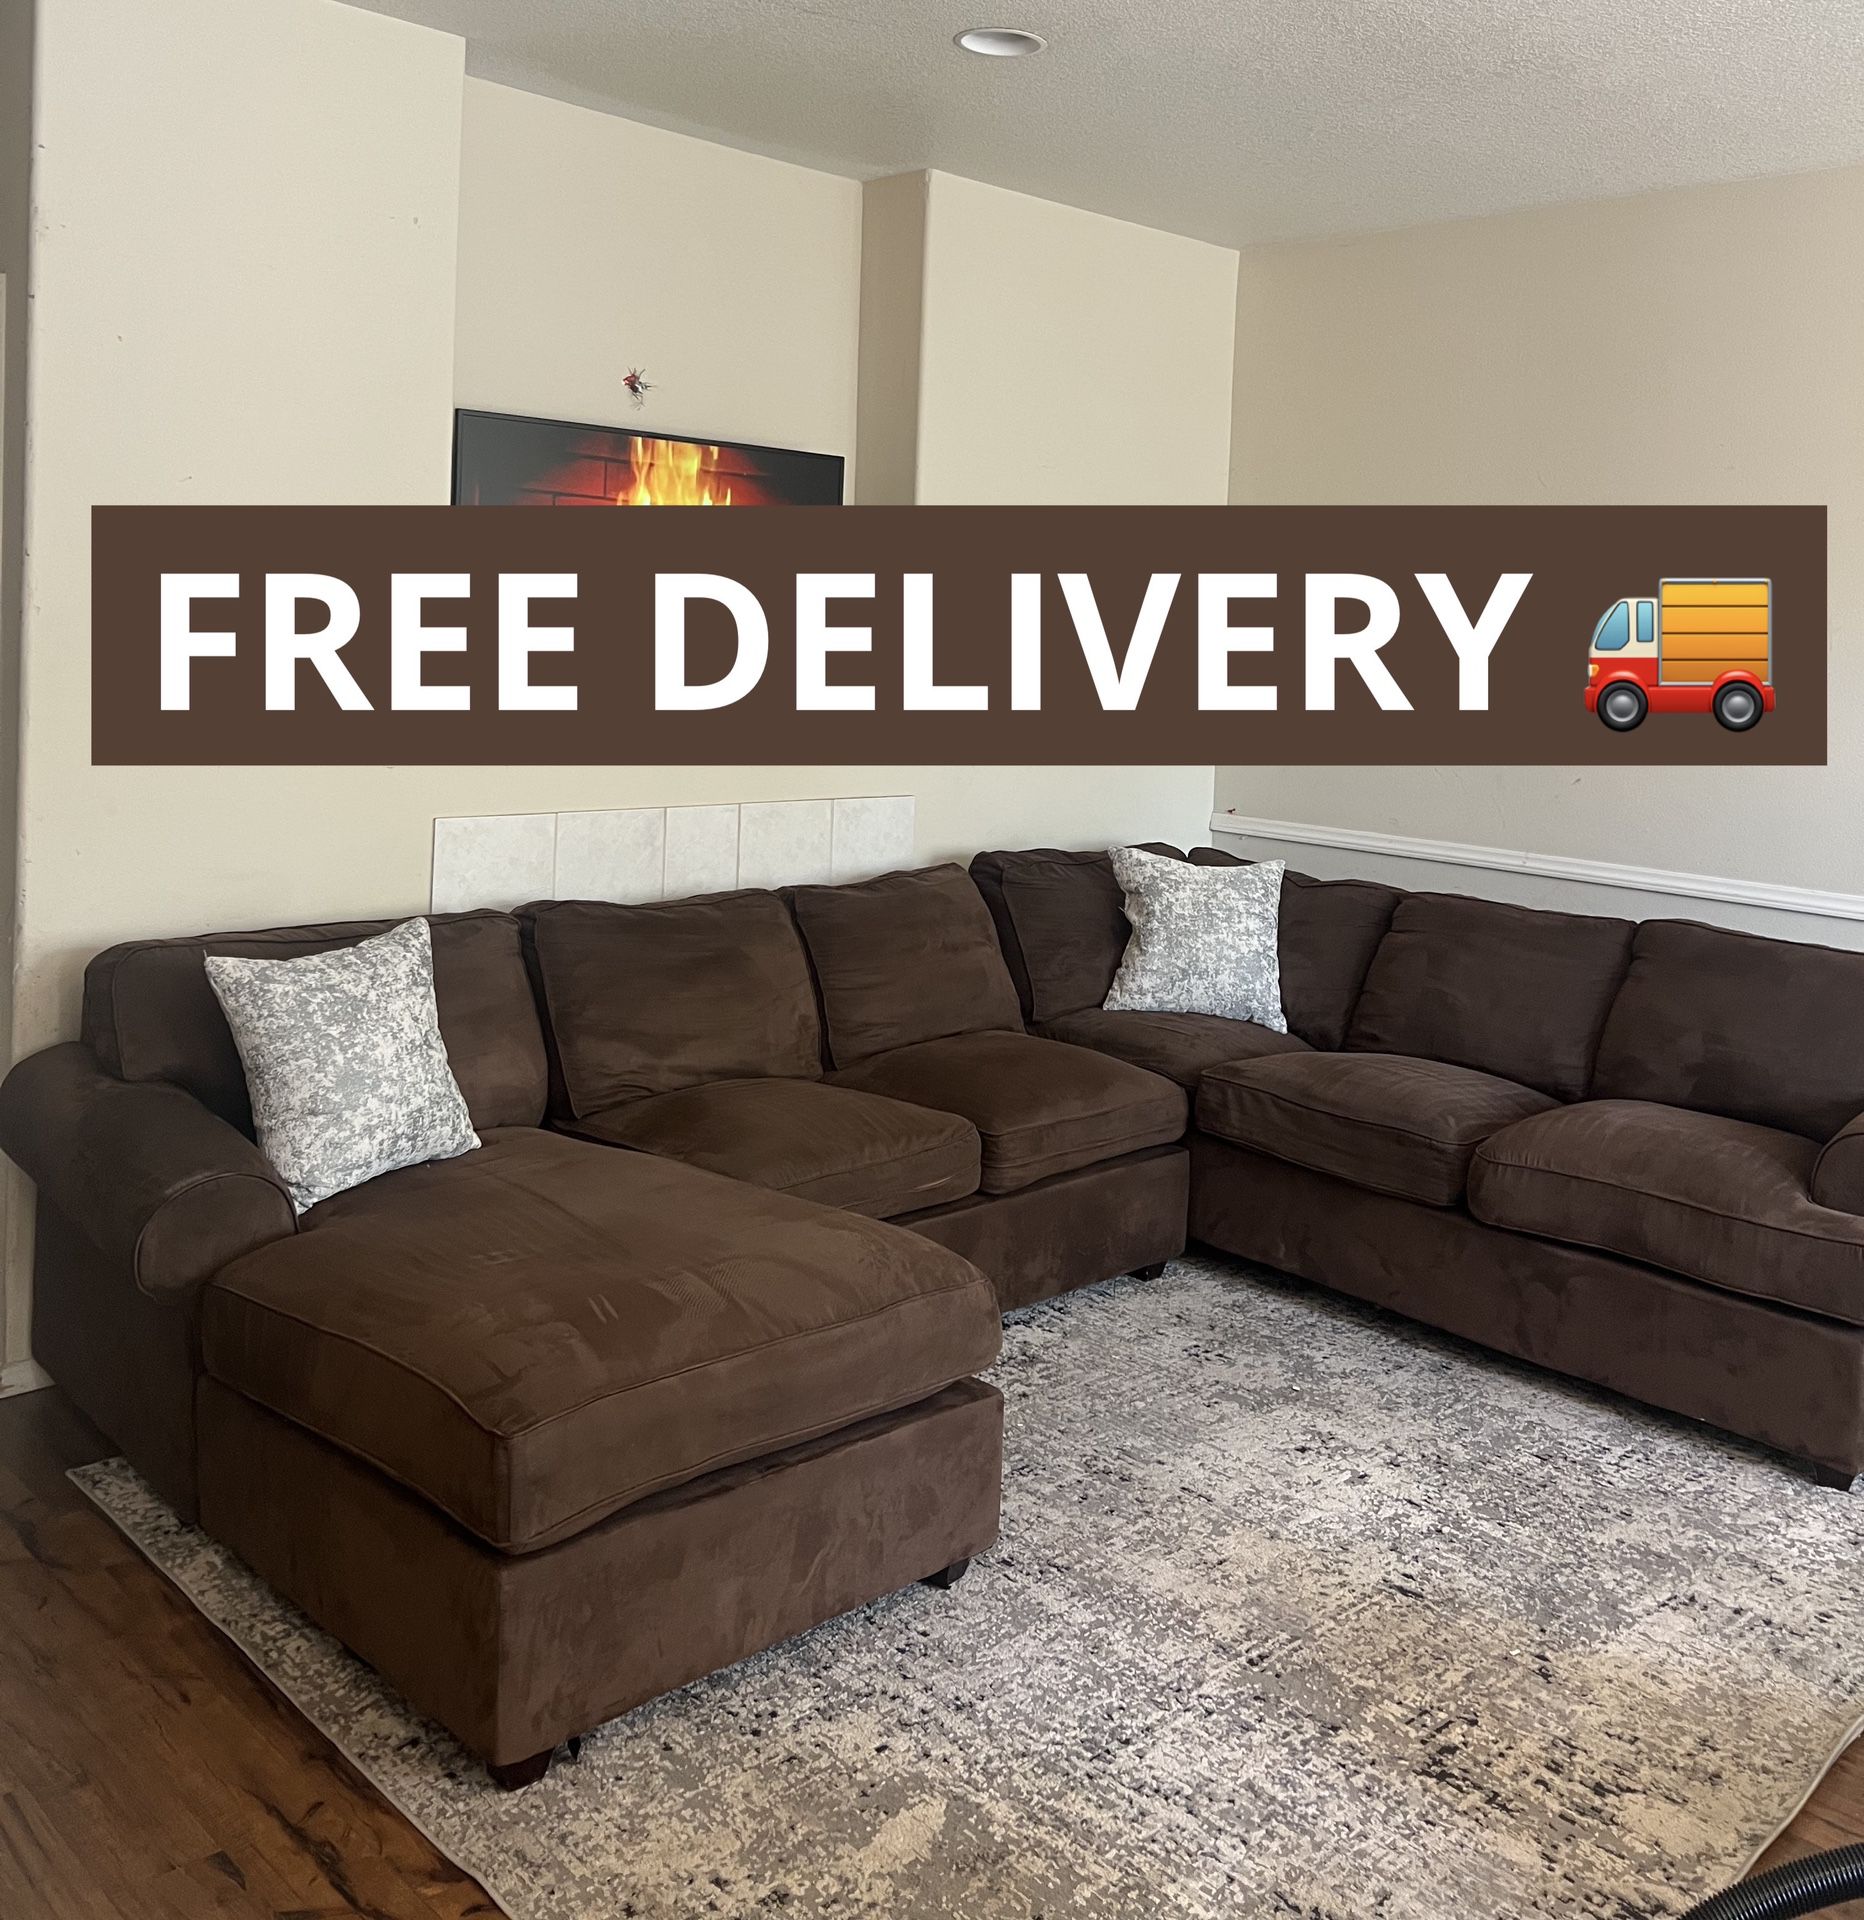 Large Brown Sectional Couch 🛋️- FREE DELIVERY 🚚 